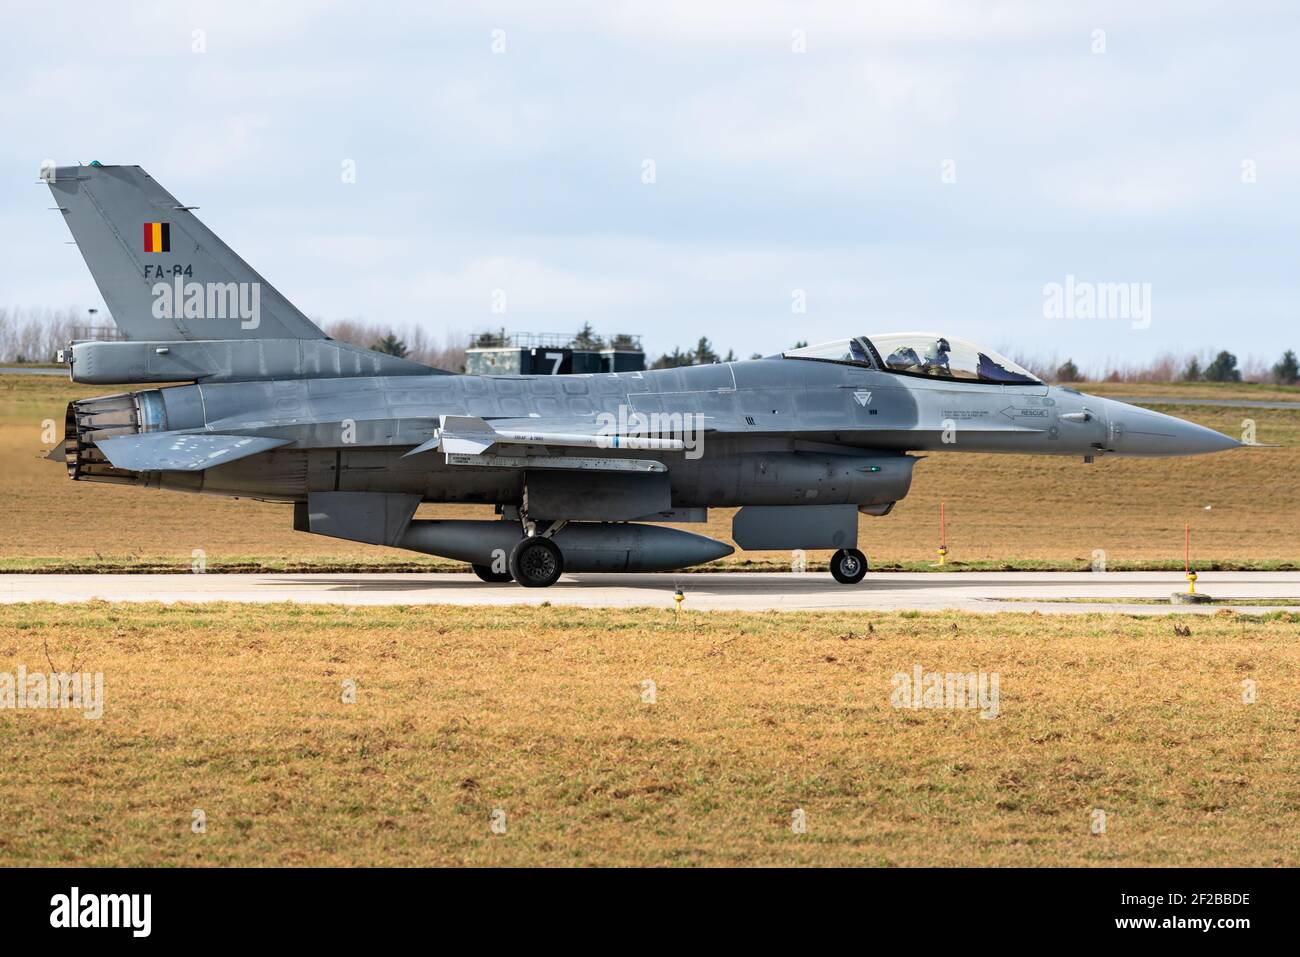 A Lockheed F-16 Fighting Falcon fighter jet of the Belgian Air Force at the Florennes Air Base. The F-16 is a single-engine multirole fighter jet. Stock Photo